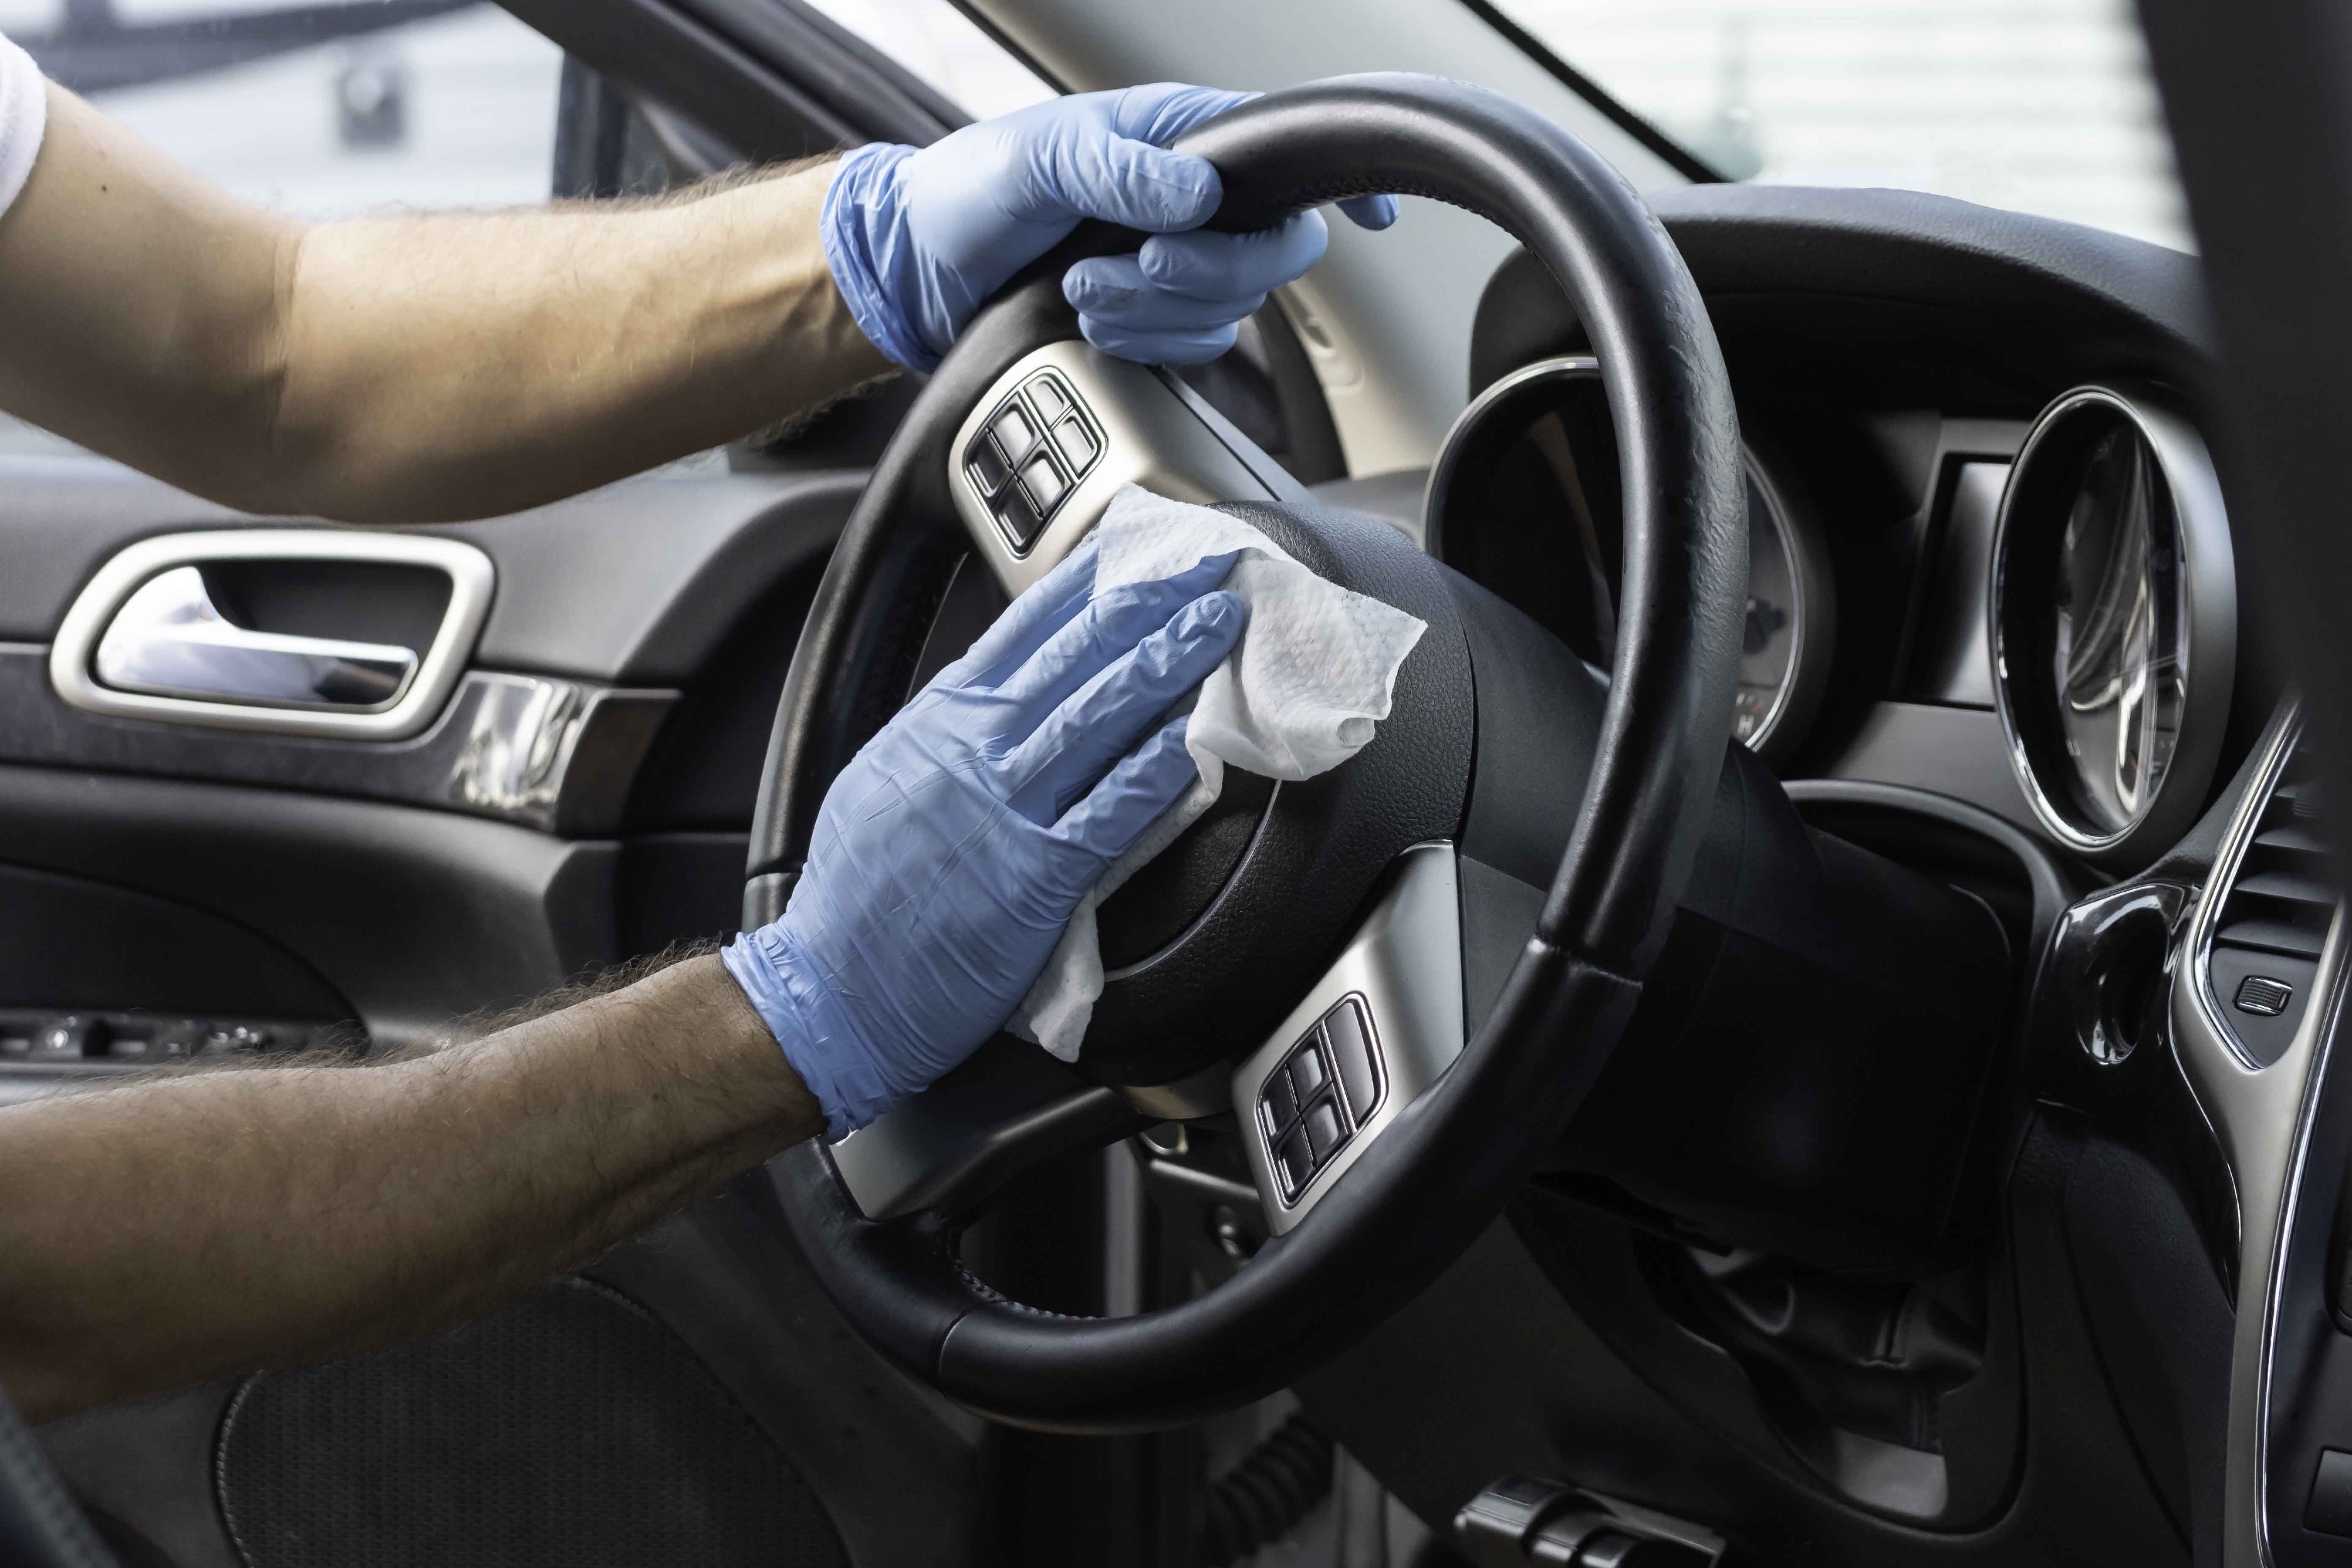 Rent a car - Vehicle cleaning and disinfection